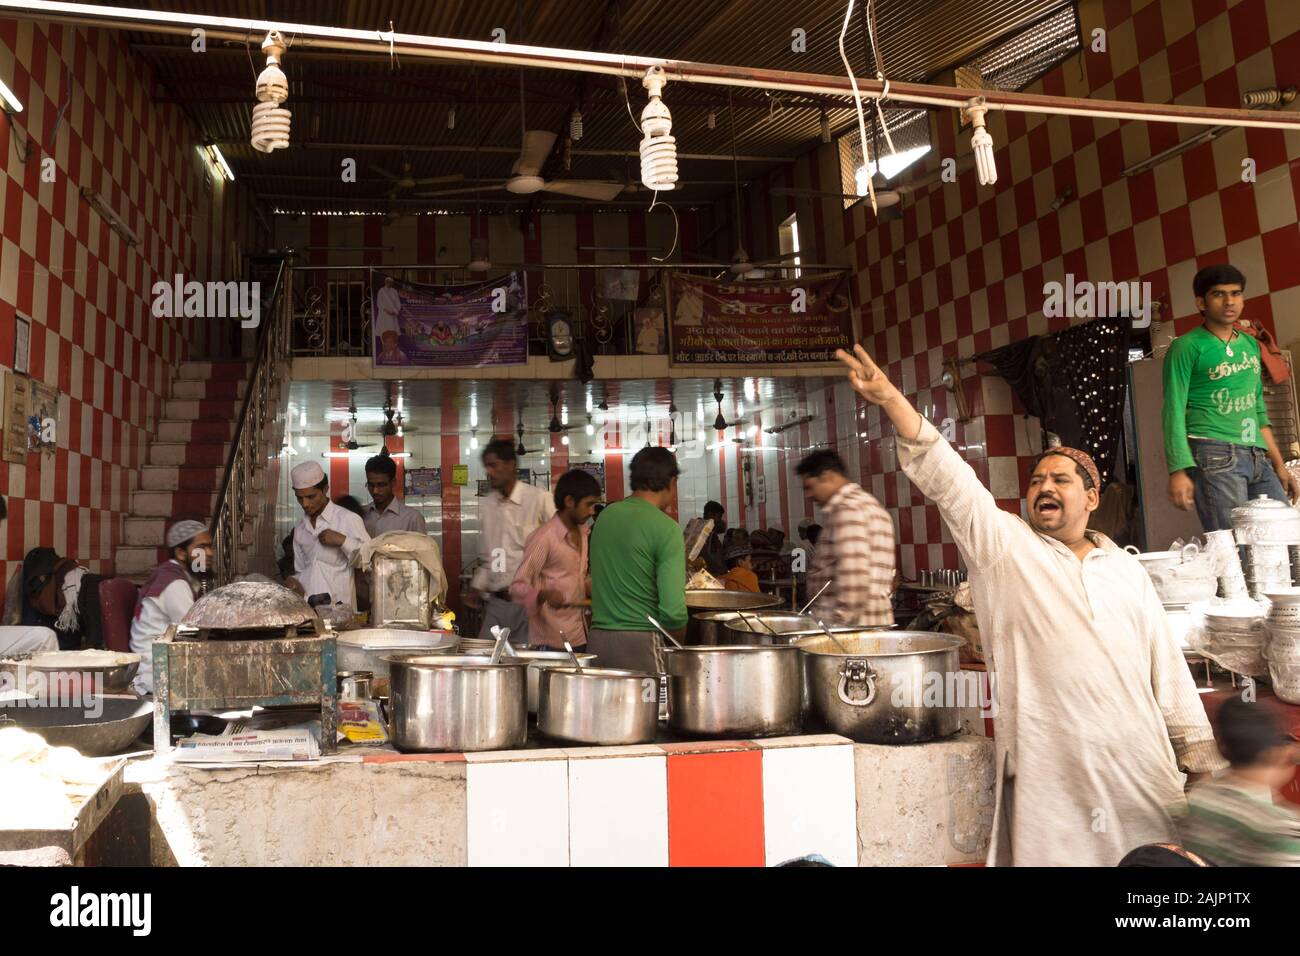 Ajmer, Rajasthan, India - 12 March 2012: Man screaming in front of local kitchen of Indian food stall at the market Stock Photo